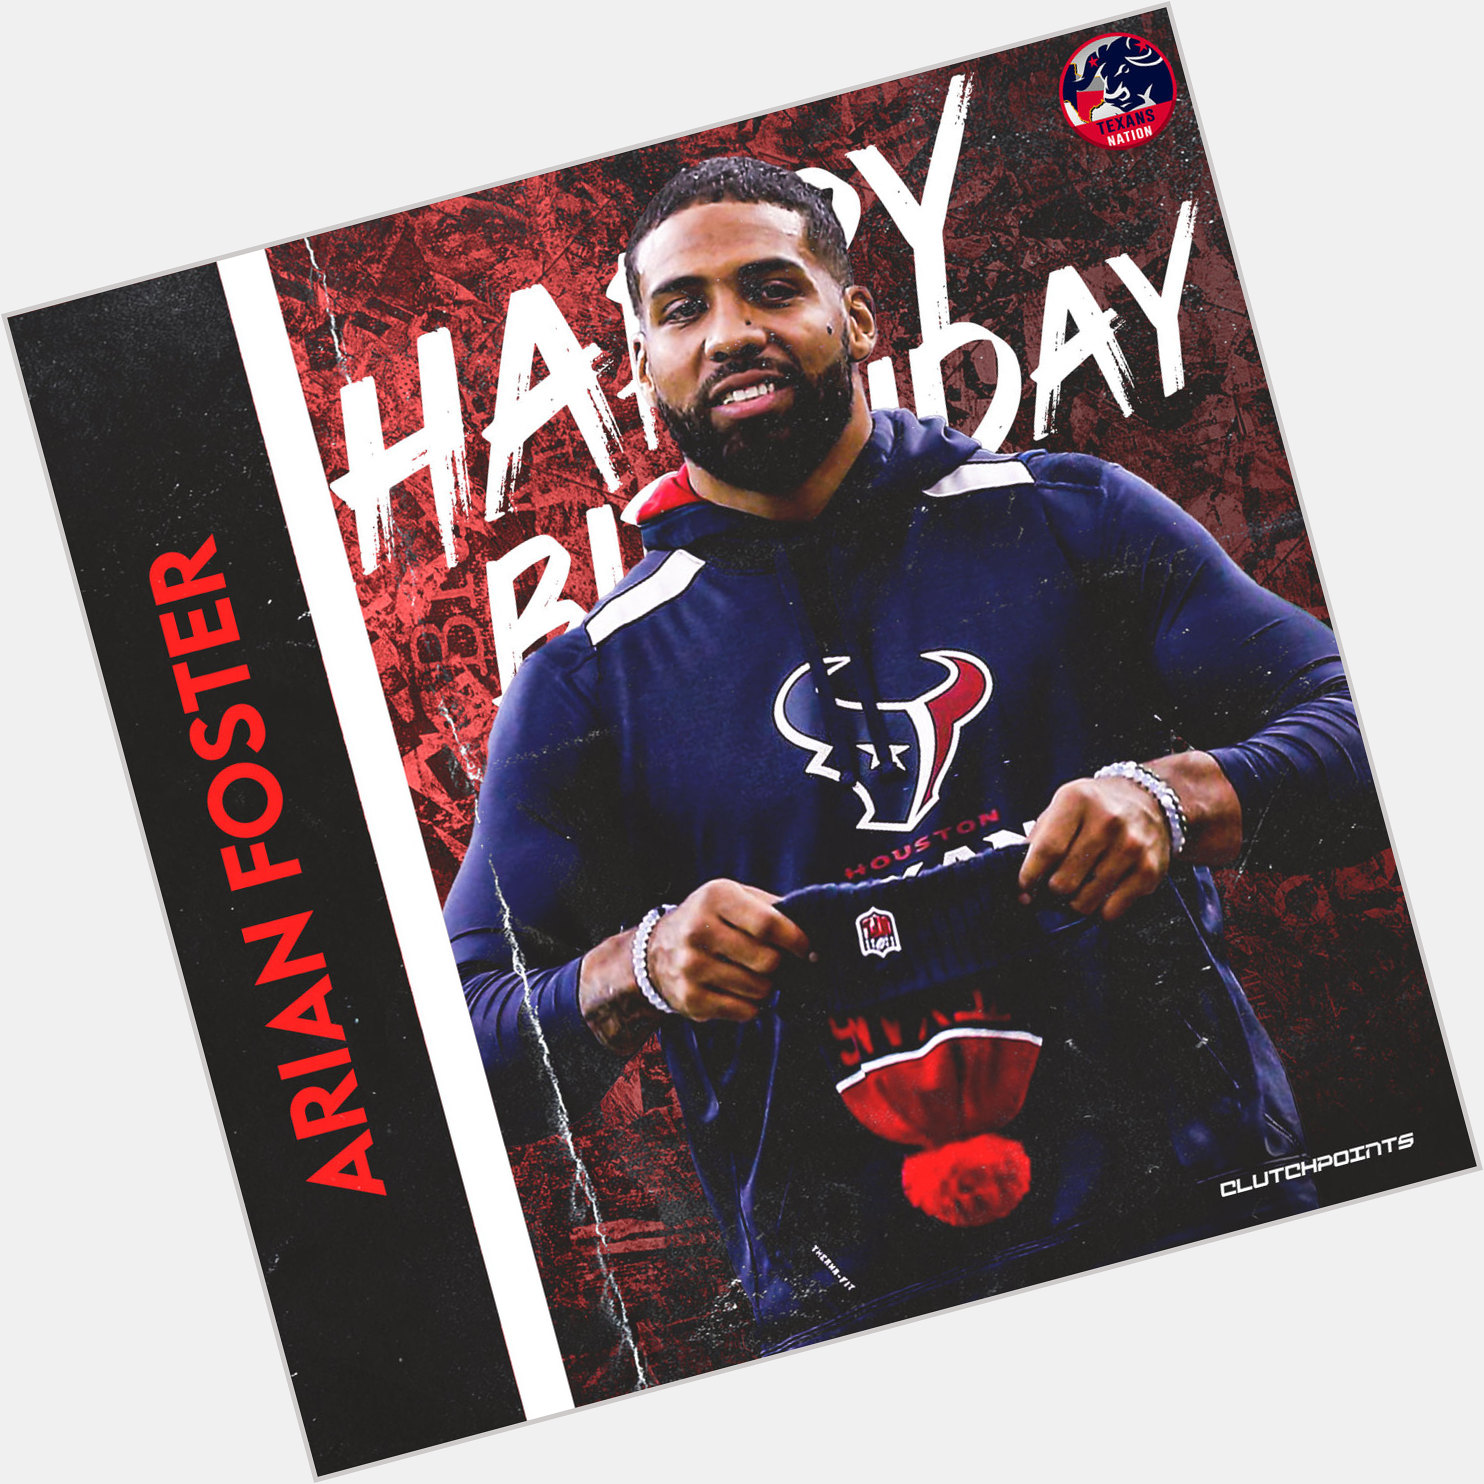 Join Texans Nation as we greet 4 x ProBowler, Arian Foster, with a happy 36th birthday 